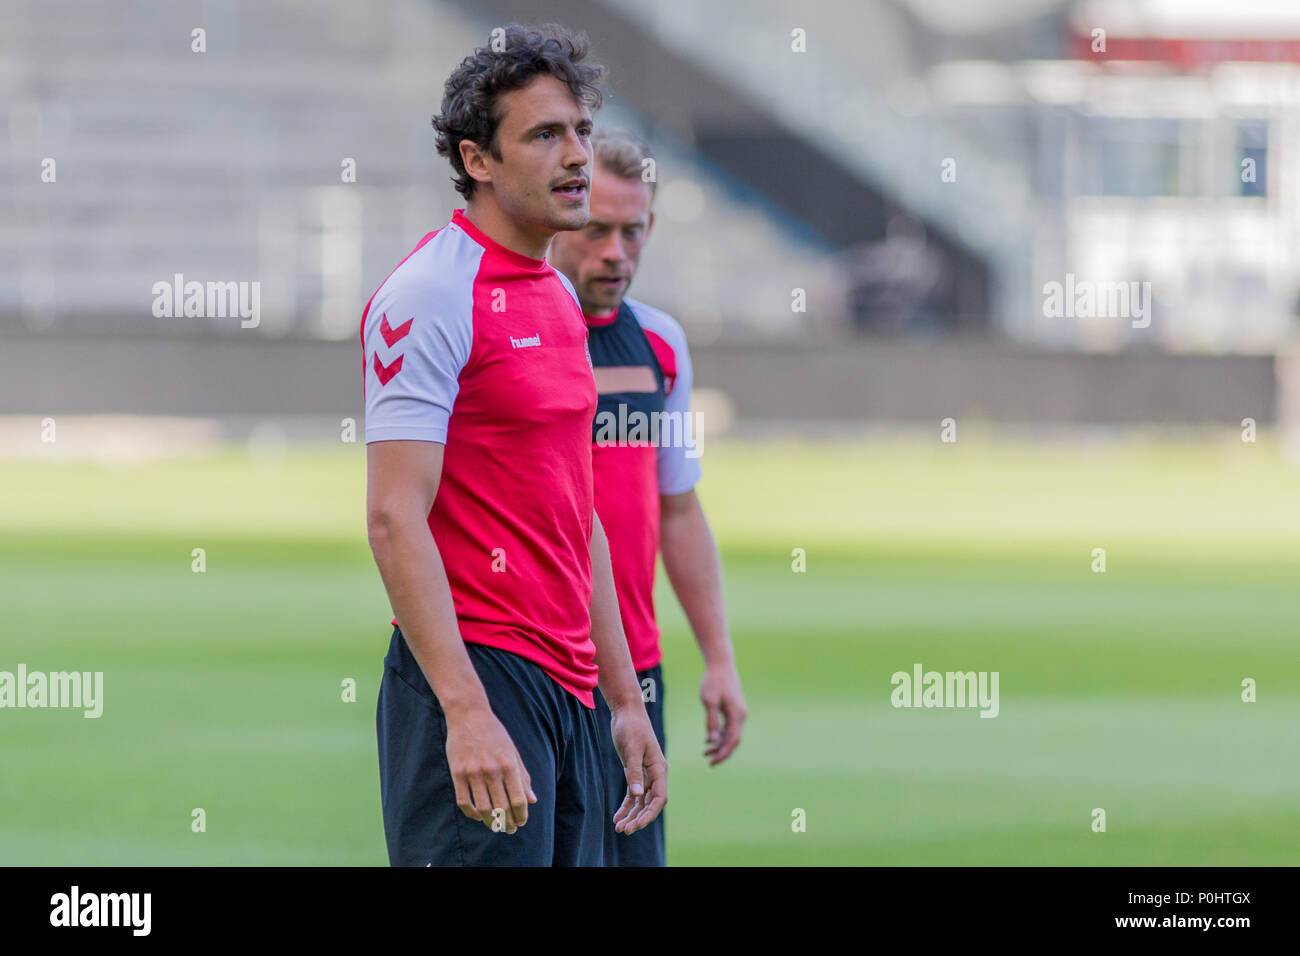 Brondby, Denmark - June 8, 2018. Thomas Delaney of the Danish national football team seen during training before the test match against Mexico at Brøndby Stadium. (Photo credit: Gonzales Photo - Thomas Rasmussen). Stock Photo